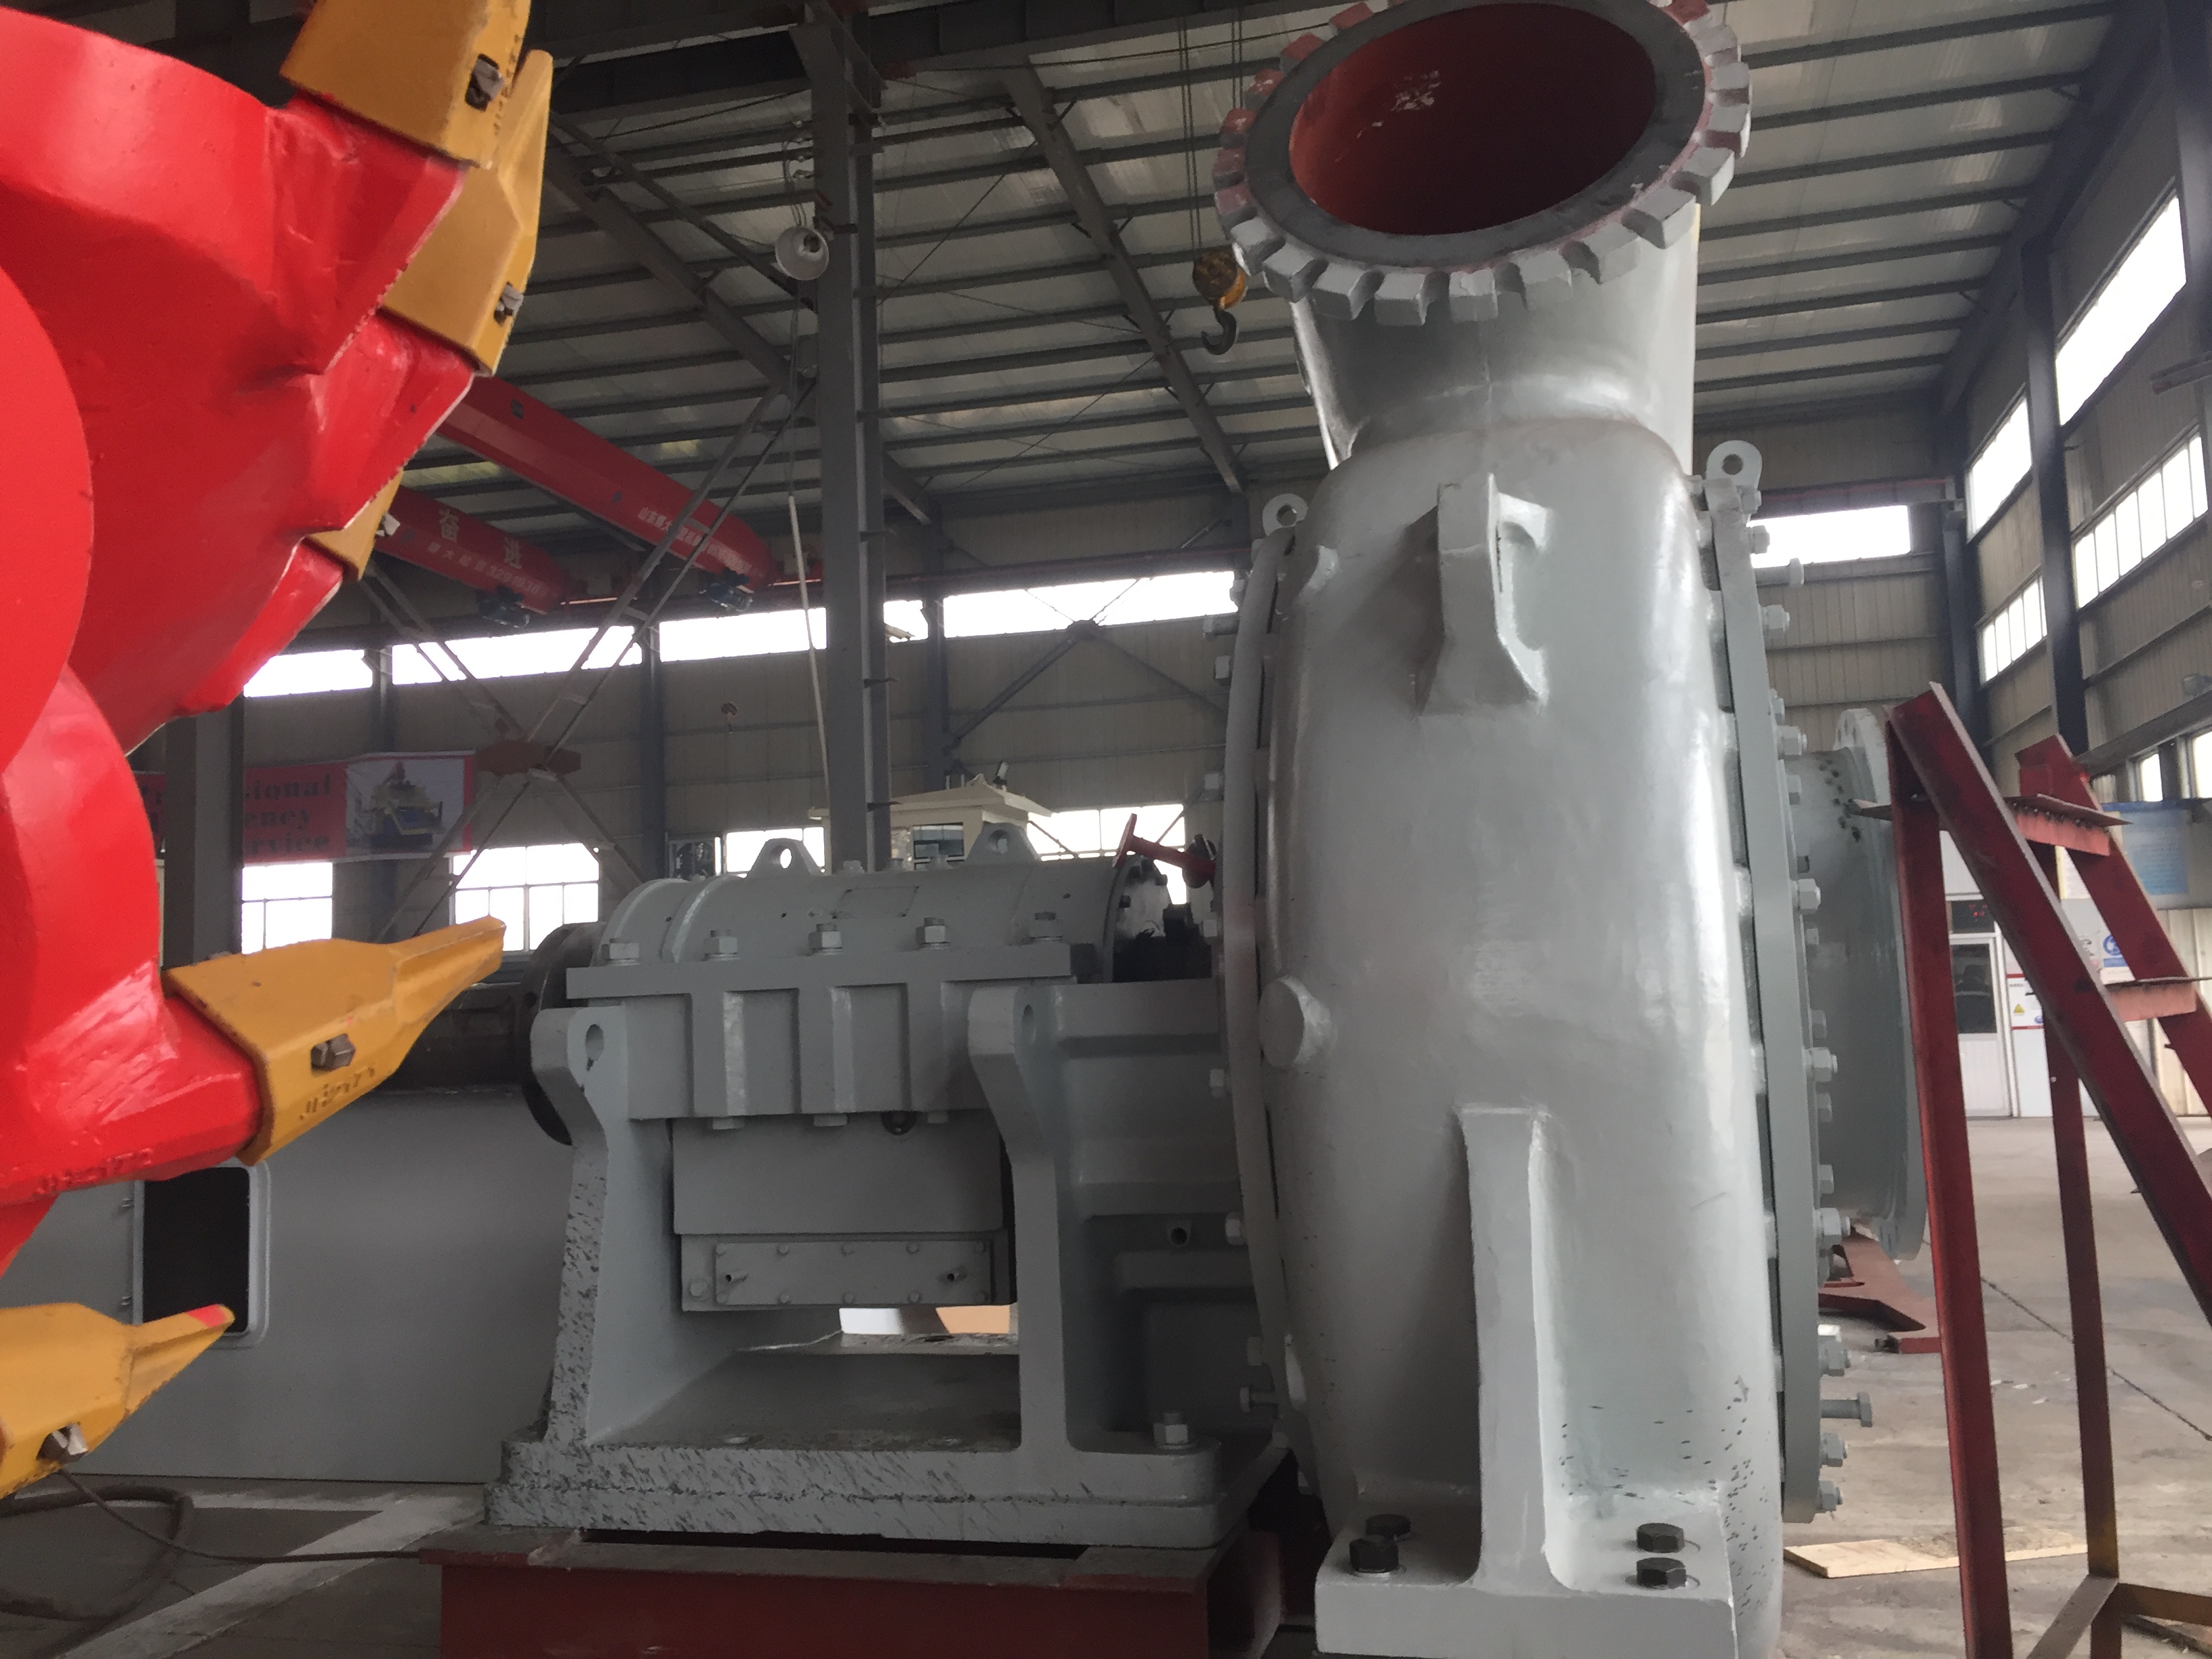 Buy 18inch Desilting Mechanical Watermaster Dredger Machinery